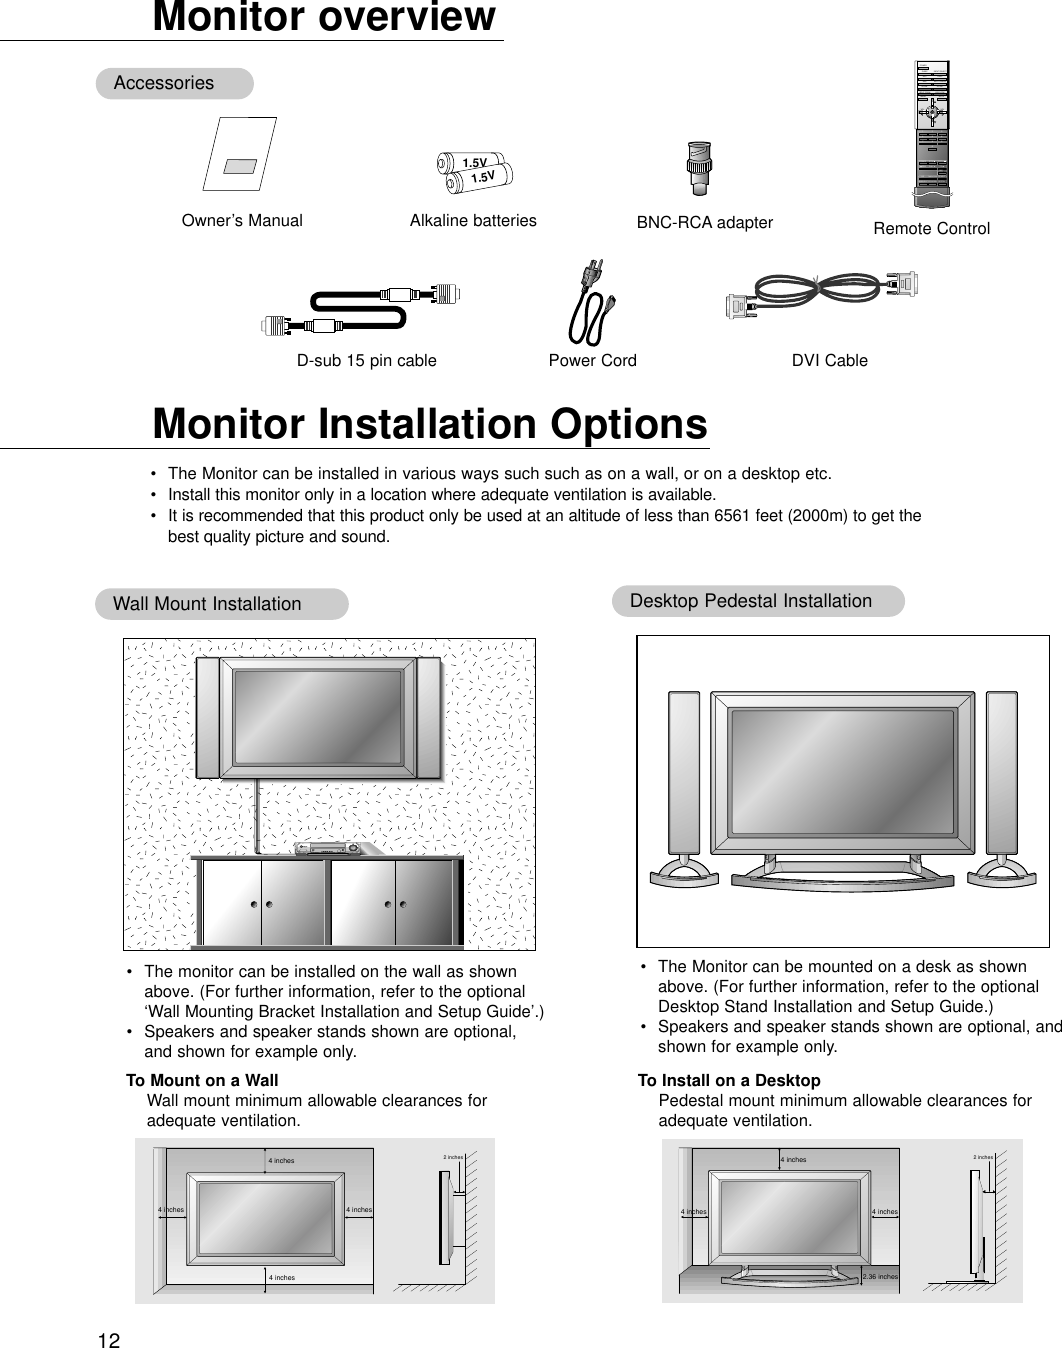 12Monitor Installation Options•The Monitor can be installed in various ways such such as on a wall, or on a desktop etc.•Install this monitor only in a location where adequate ventilation is available.•It is recommended that this product only be used at an altitude of less than 6561 feet (2000m) to get thebest quality picture and sound.Monitor overviewD-sub 15 pin cableOwner’s Manual1.5V1.5VAlkaline batteries BNC-RCA adapterPower Cord1234567809POWERSLEEP INPUT SELECTAPC DASPARCAUTO CONFIG.ZOOM -ZOOM +SPLIT ZOOMMENU MUTEOKVOLPOWER STOPPLAY FFRECREWP/STILLPIPTWIN PICTUREPIP POSITIONPIP STILLSOUND SELECTPIP INPUTVOLKEY LOCKRemote ControlDVI CableAccessories2 inches4 inches2.36 inches4 inches4 inches4 inches4 inches4 inches4 inches2 inchesTo Mount on a WallWall mount minimum allowable clearances foradequate ventilation.To Install on a DesktopPedestal mount minimum allowable clearances foradequate ventilation.Wall Mount Installation Desktop Pedestal Installation•The monitor can be installed on the wall as shownabove. (For further information, refer to the optional‘Wall Mounting Bracket Installation and Setup Guide’.)•Speakers and speaker stands shown are optional,and shown for example only.•The Monitor can be mounted on a desk as shownabove. (For further information, refer to the optionalDesktop Stand Installation and Setup Guide.)•Speakers and speaker stands shown are optional, andshown for example only.